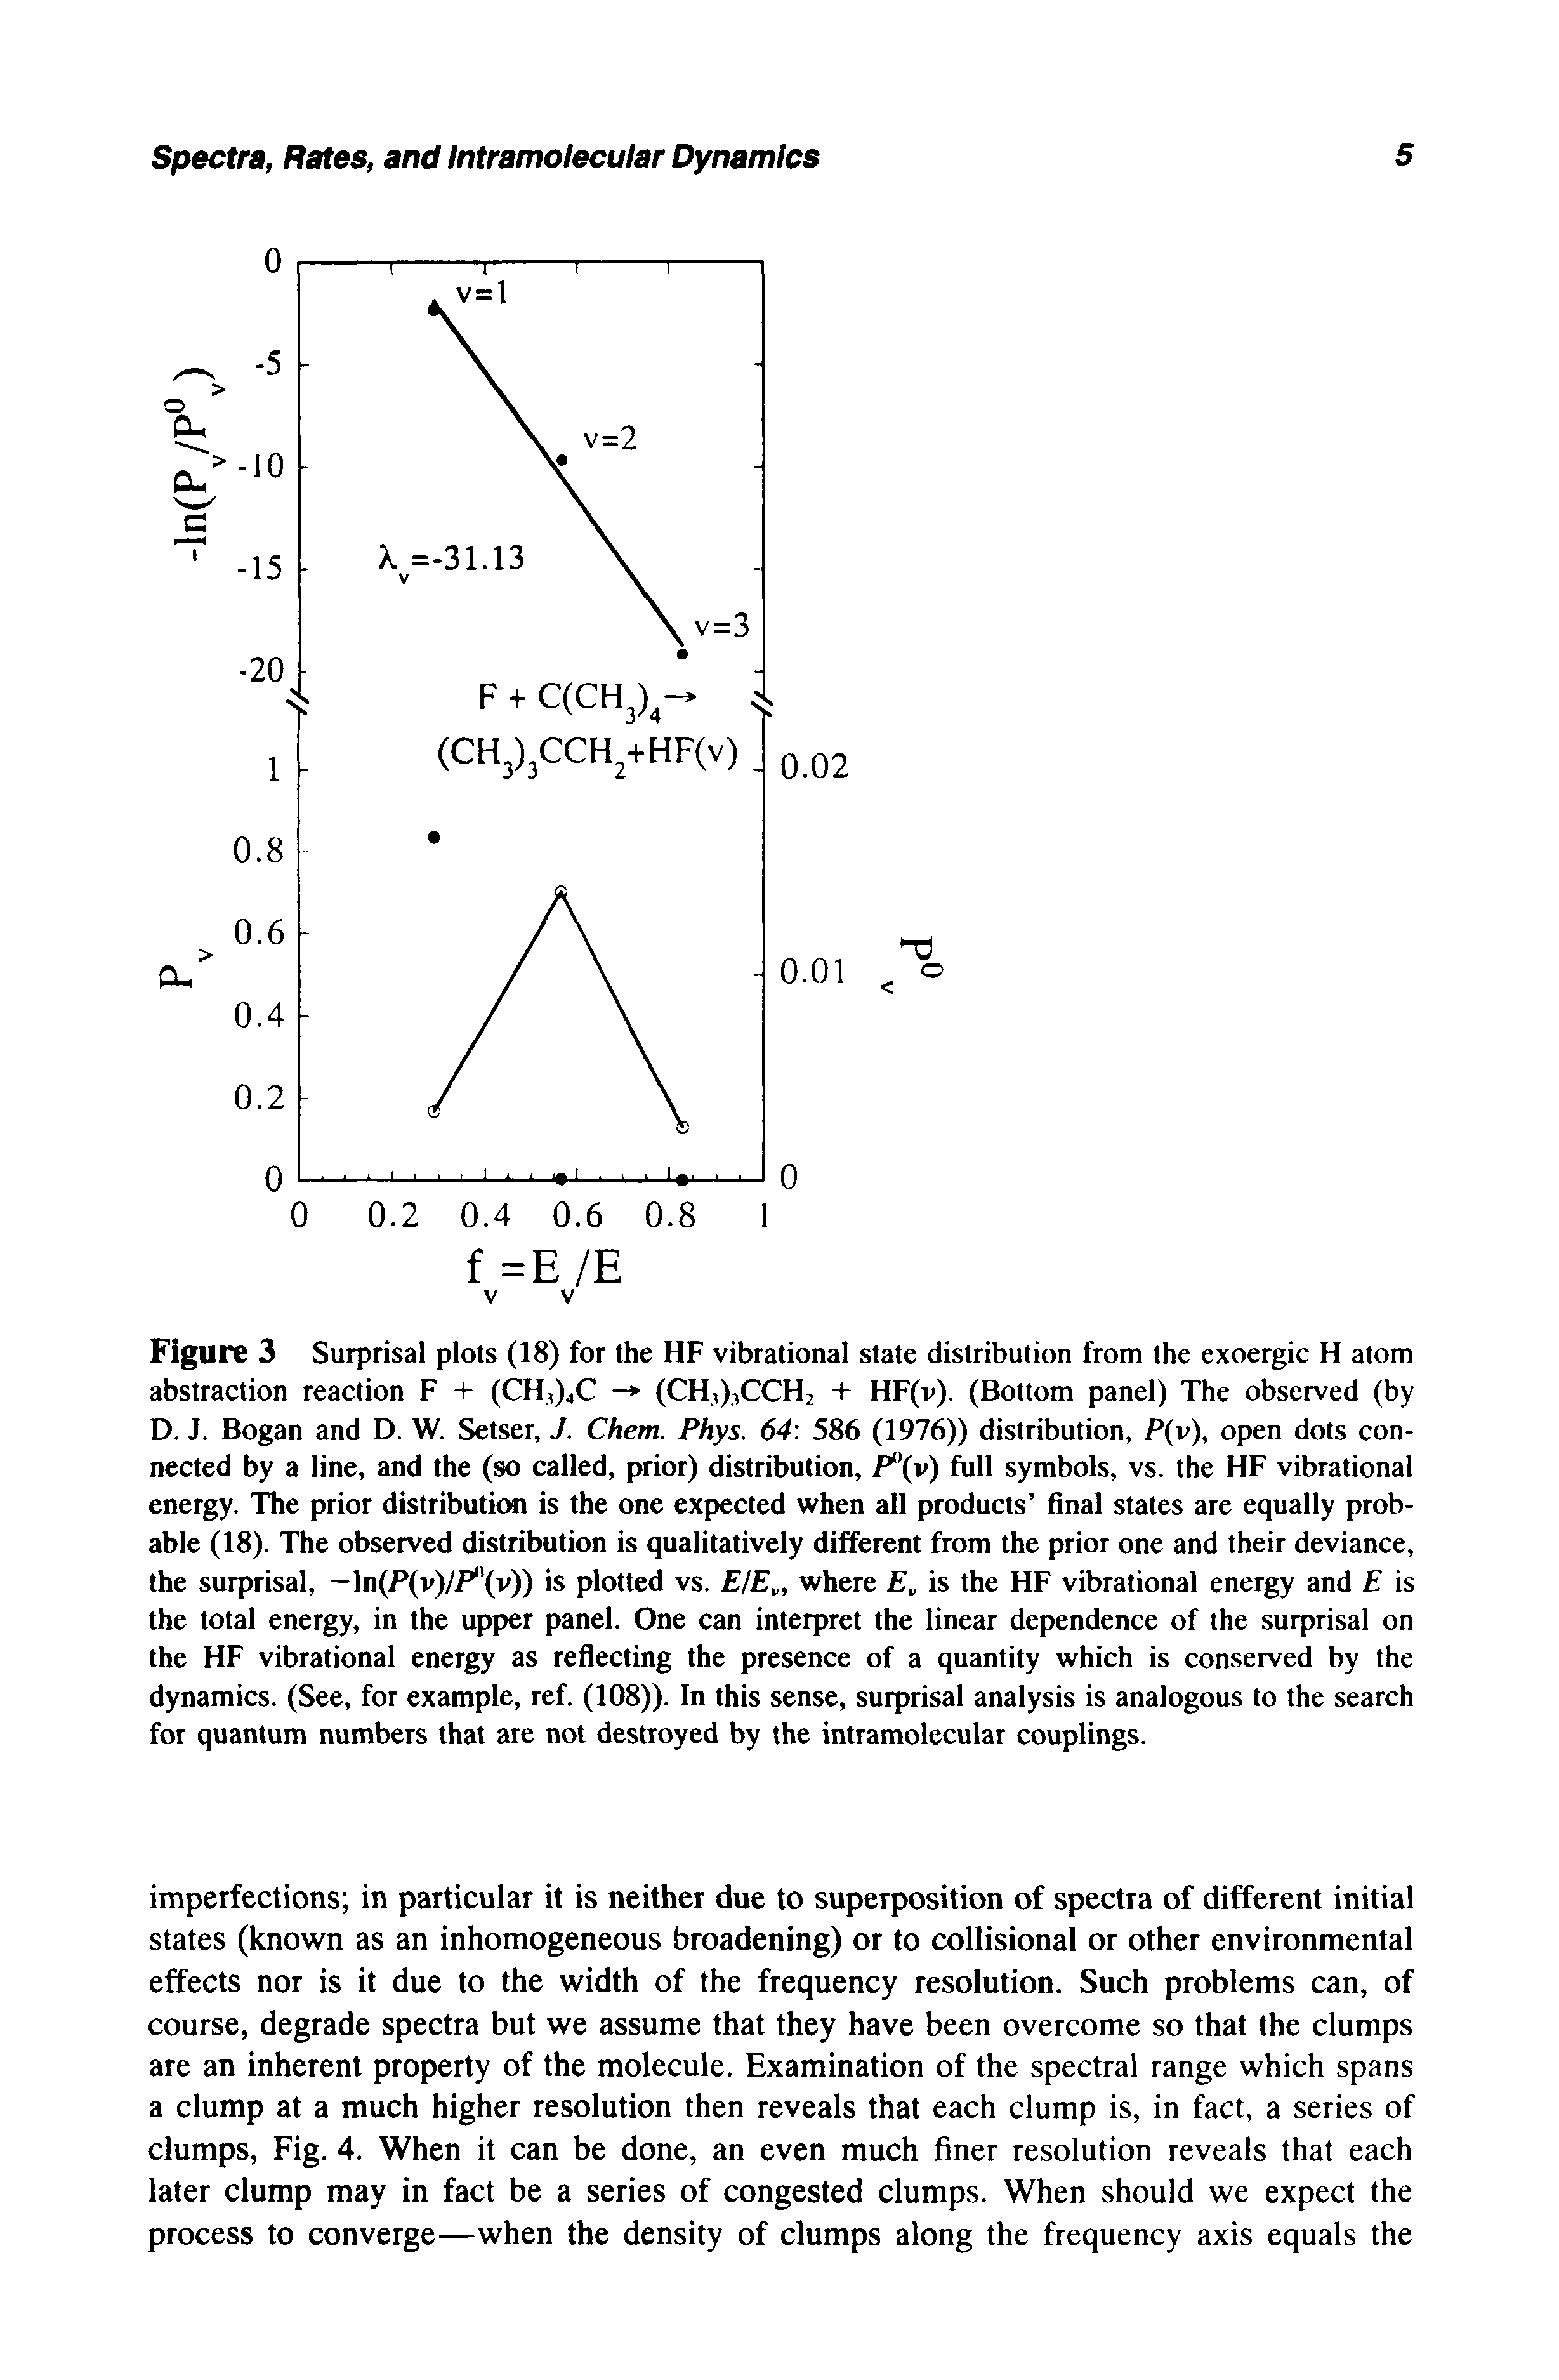 Figure 3 Surprisal plots (18) for the HF vibrational state distribution from the exoergic H atom abstraction reaction F + (CH,)4C - (CH,),CCH2 + HF(v). (Bottom panel) The observed (by D. J. Bogan and D. W. Setser, J. Chem. Phys. 64 586 (1976)) distribution, P(v), open dots connected by a line, and the (so called, prior) distribution, P (v) full symbols, vs. the HF vibrational energy. The prior distribution is the one expected when all products final states are equally probable (18). The observed distribution is qualitatively different from the prior one and their deviance, the surprisal, —In(P(v)/P"(v)) is plotted vs. E/Ev, where Ev is the HF vibrational energy and E is the total energy, in the upper panel. One can interpret the linear dependence of the surprisal on the HF vibrational energy as reflecting the presence of a quantity which is conserved by the dynamics. (See, for example, ref. (108)). In this sense, surprisal analysis is analogous to the search for quantum numbers that are not destroyed by the intramolecular couplings.